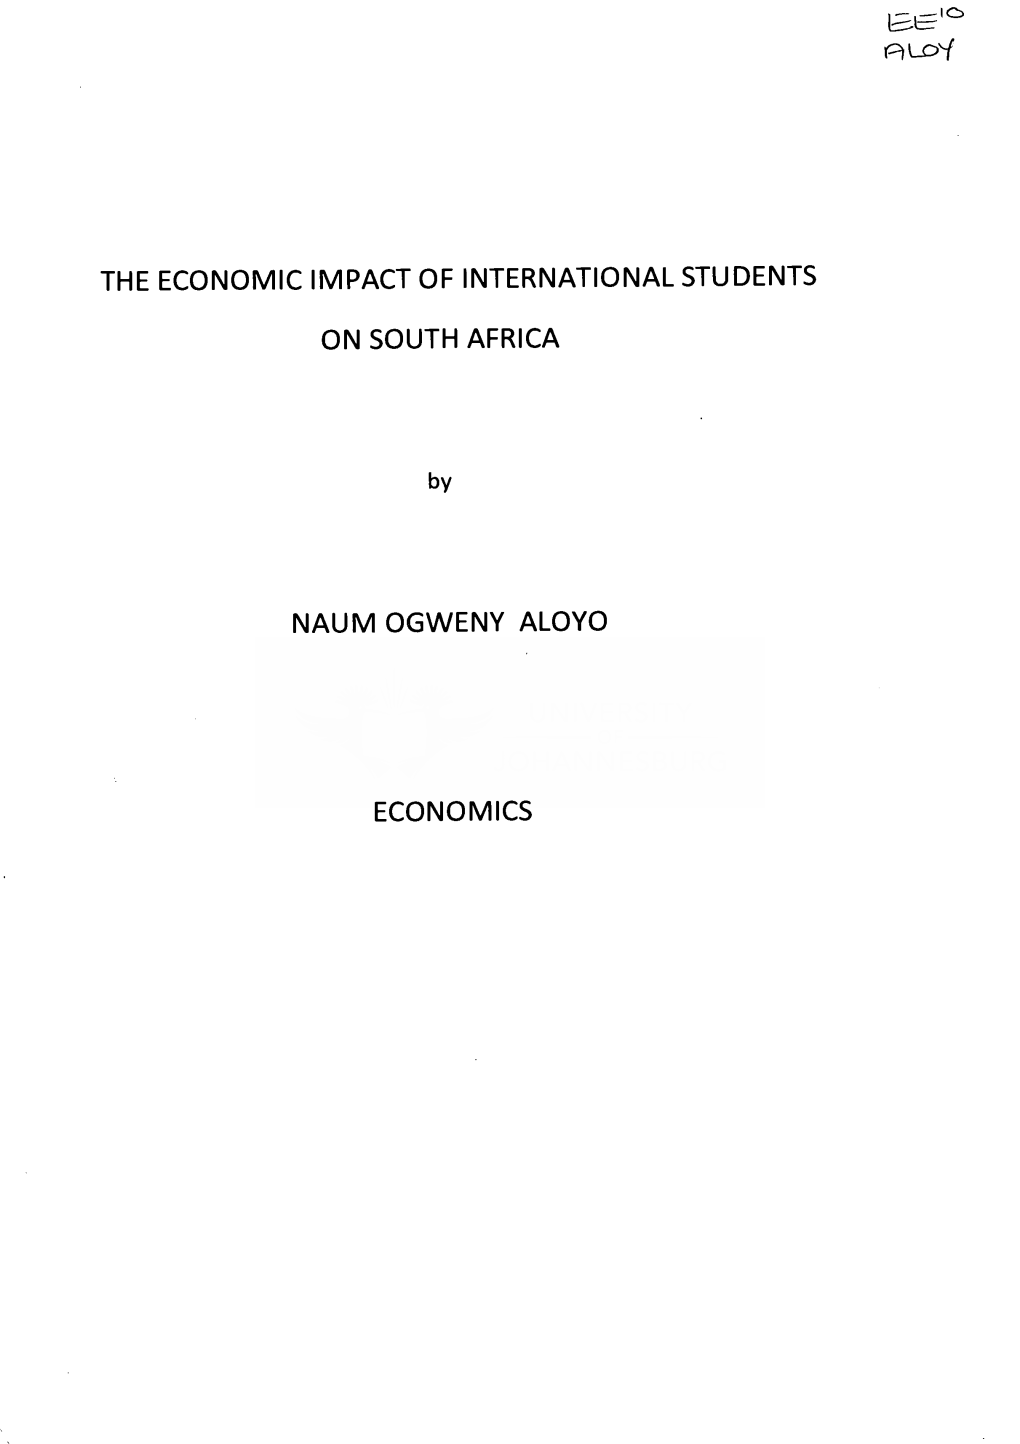 The Economic Impact of International Students on South Africa Should Inform an Internationalisation Policy of University Education in South Africa